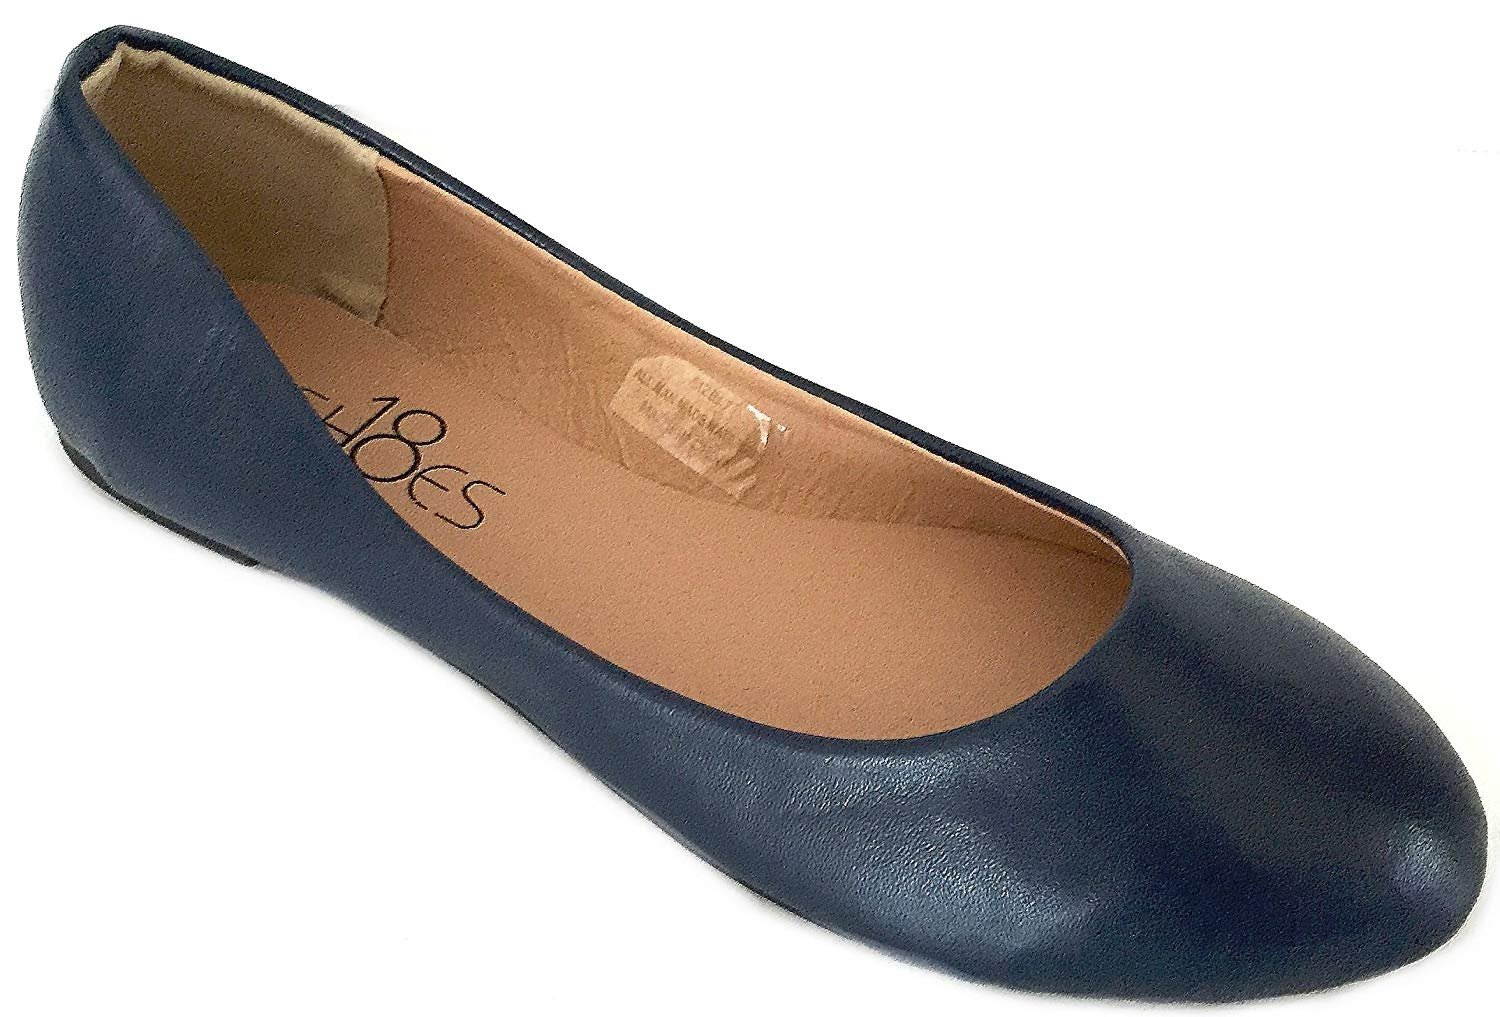 Shoes 18 Womens Classic Round Toe Ballerina Ballet Flat Shoes 8600 Navy Pu 65